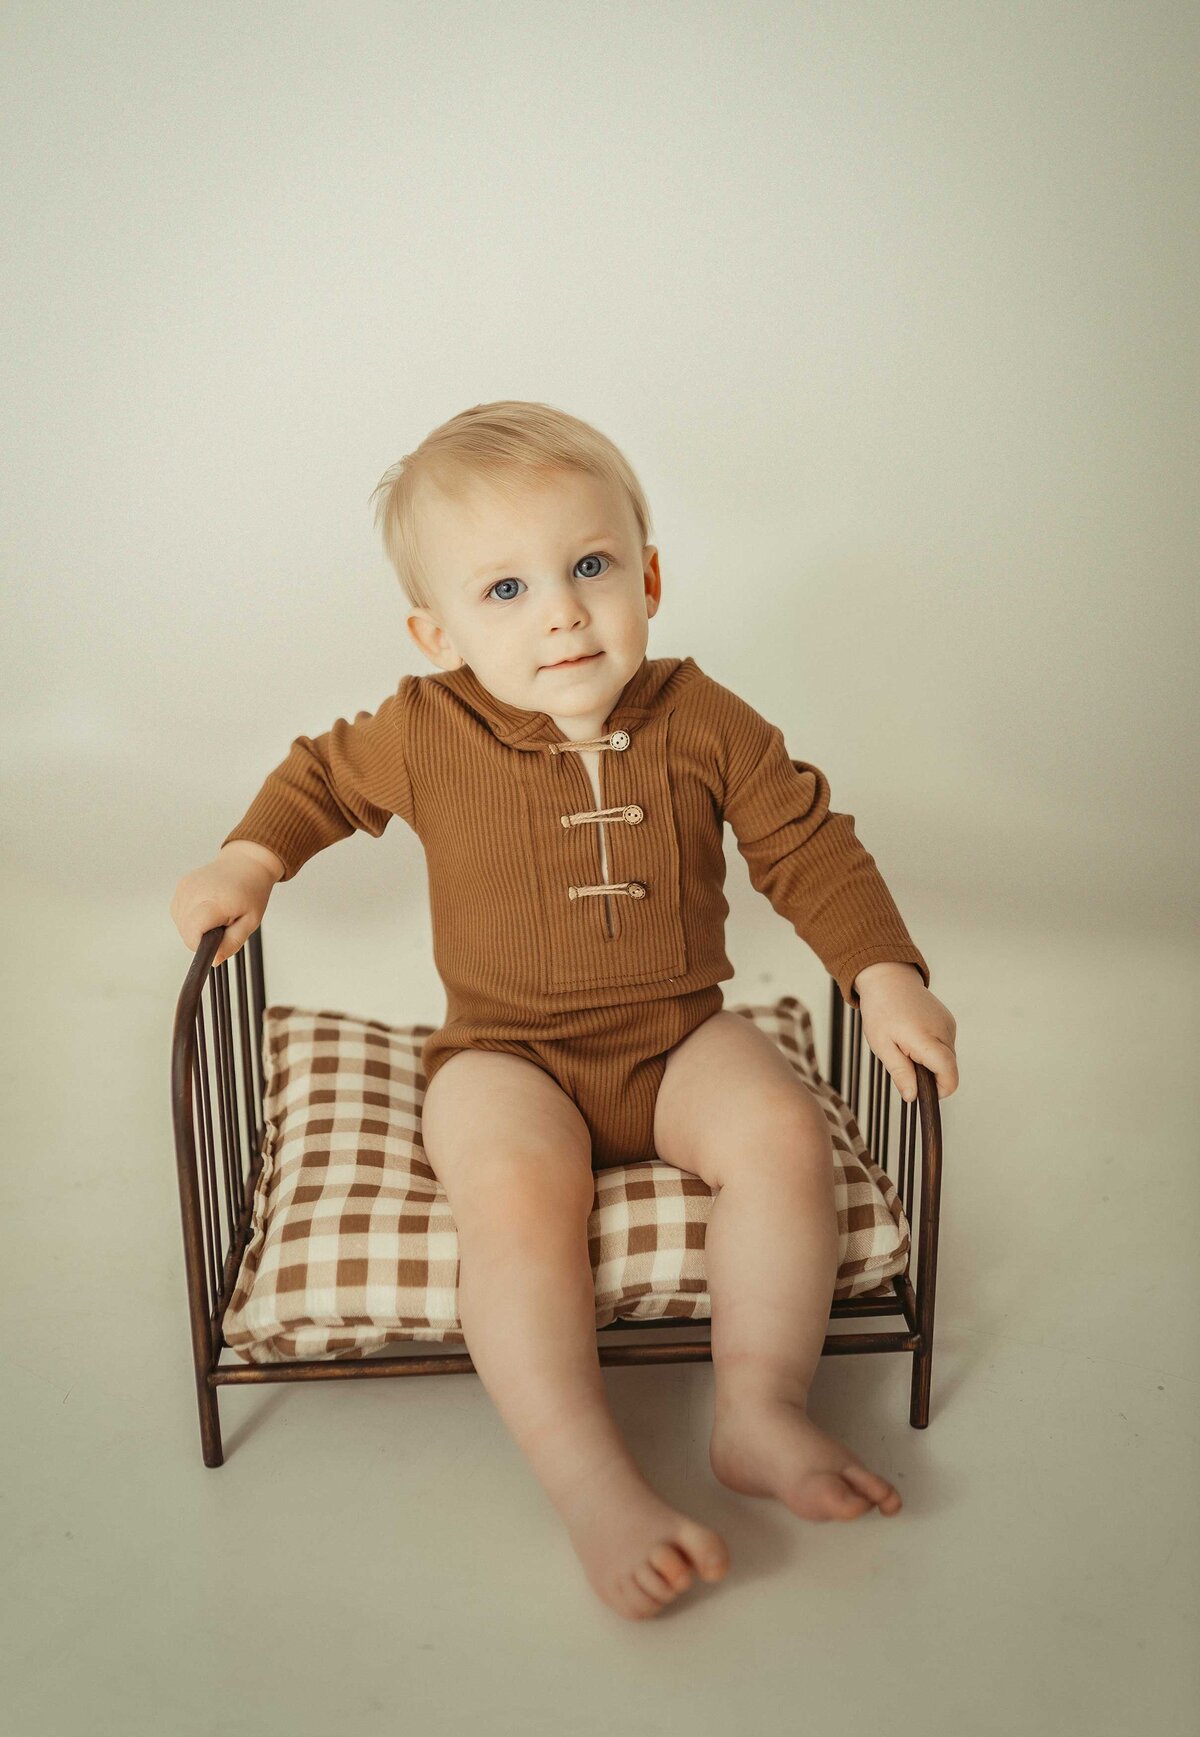 young boy sitting on a toy metal crib wearing a brown outfit